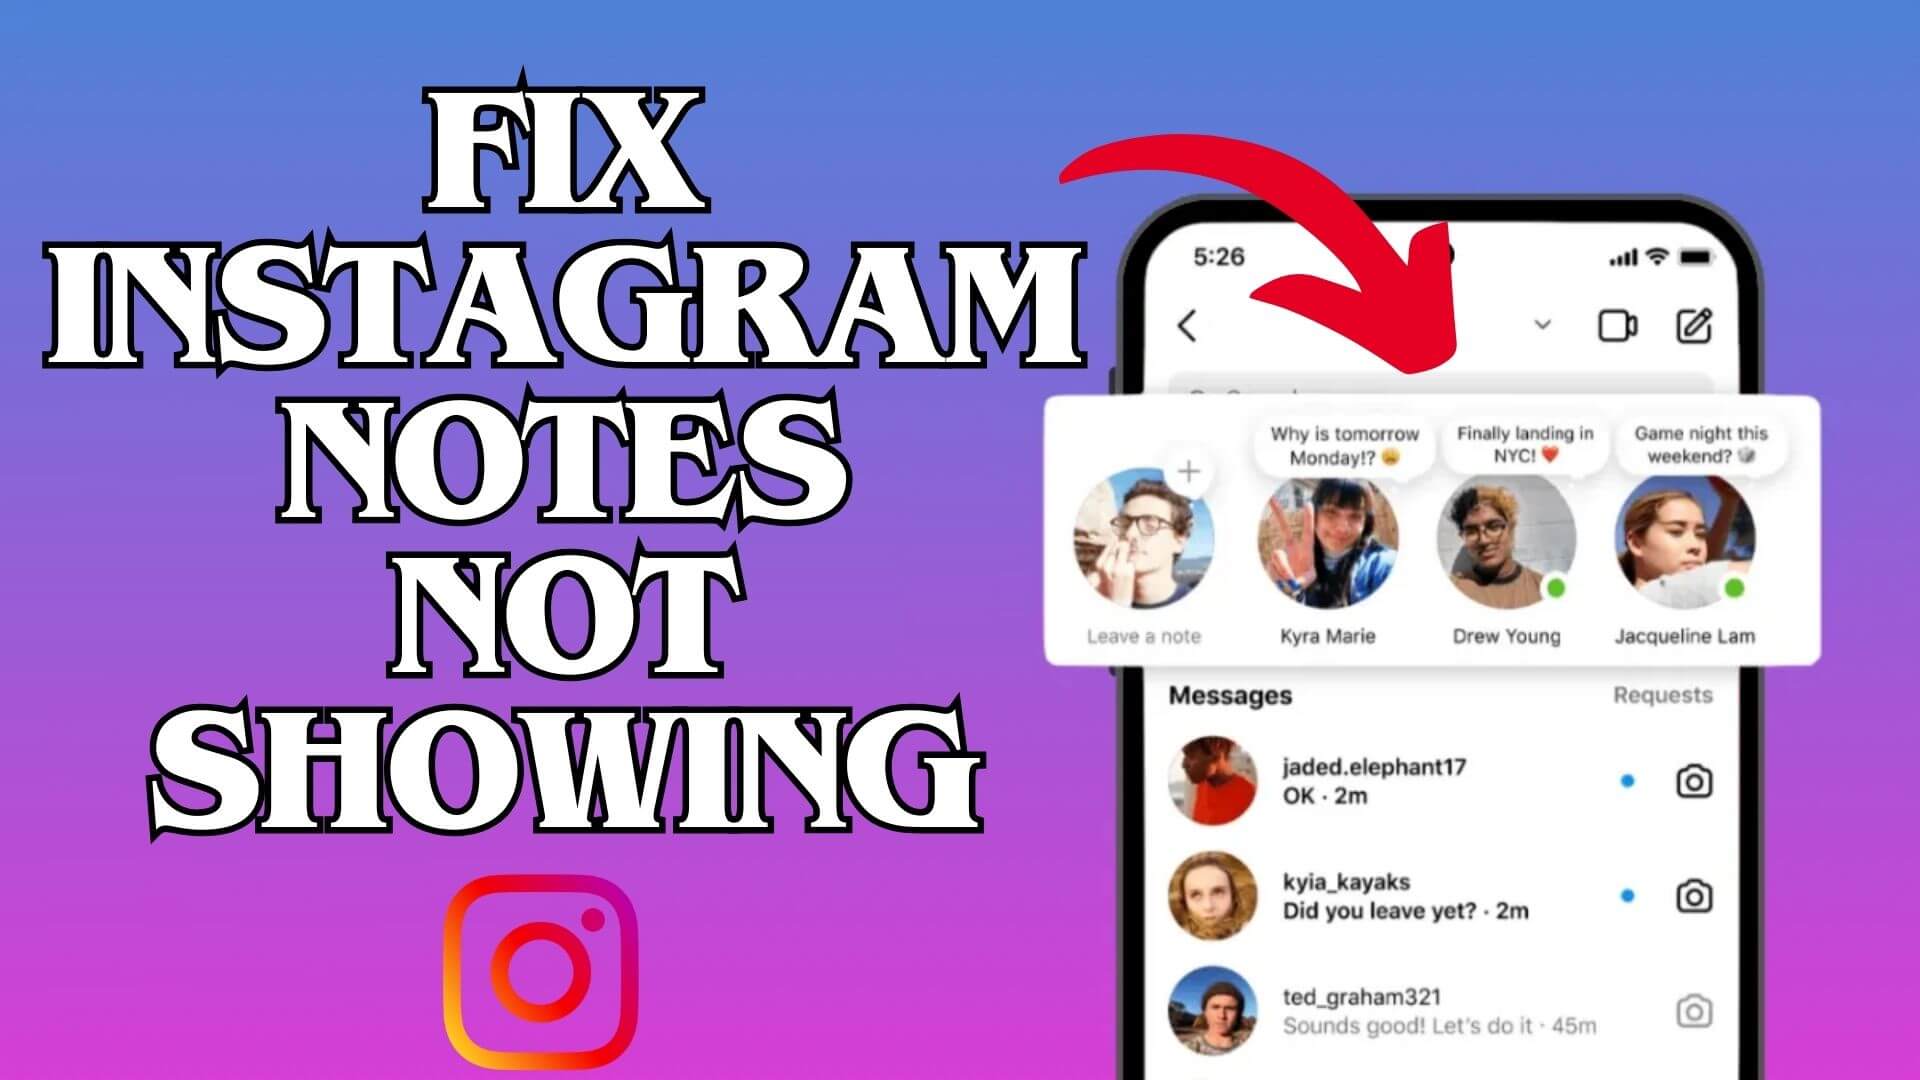 Fix Instagram Notes Not Showing On Android/iPhone